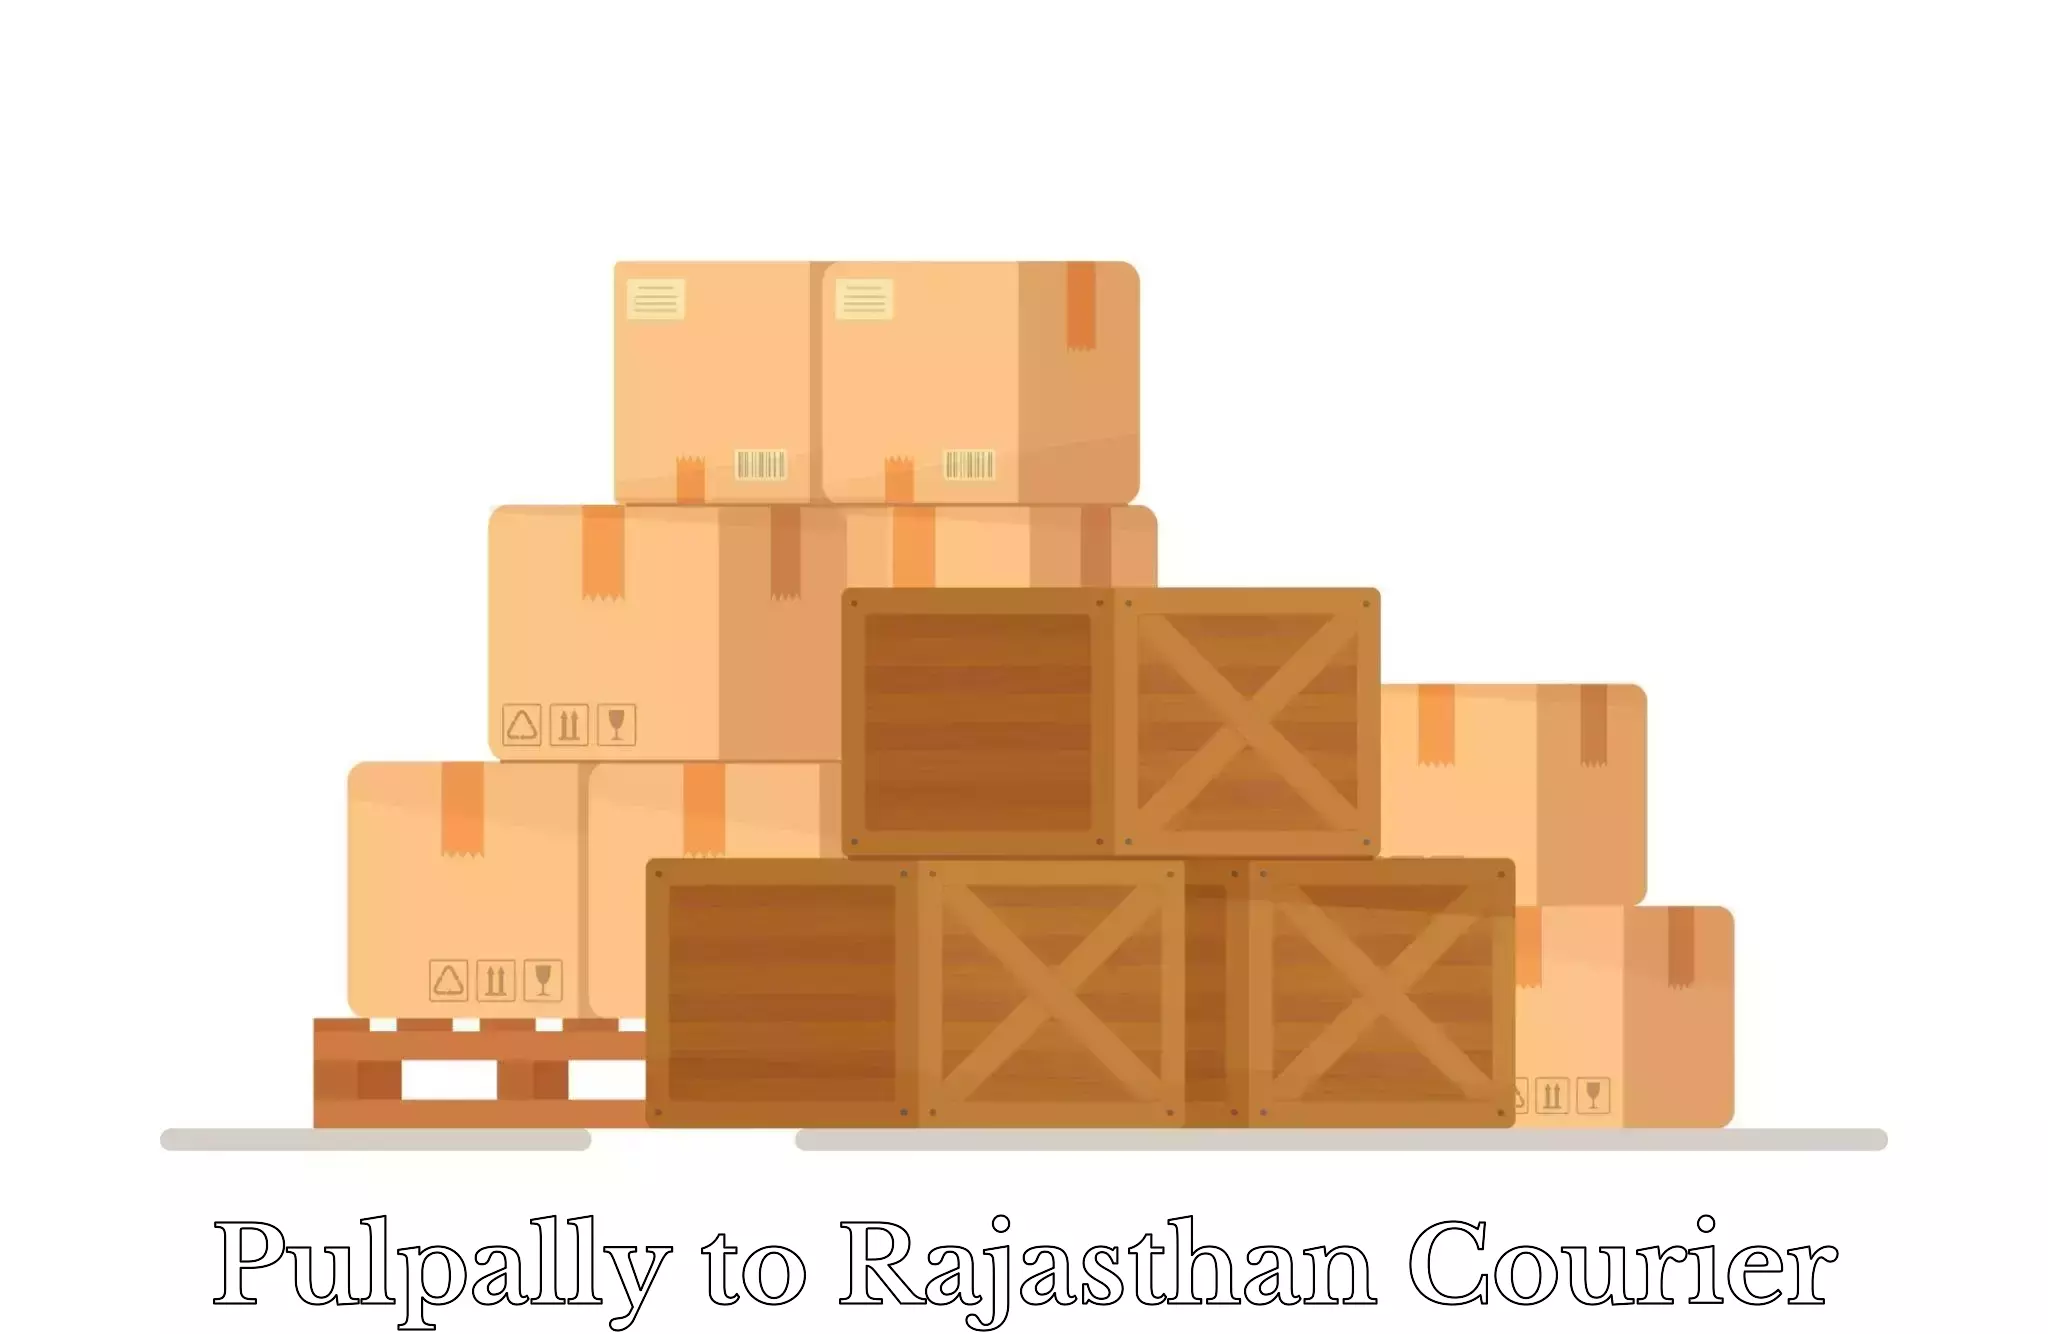 Baggage delivery management Pulpally to Raipur Pali